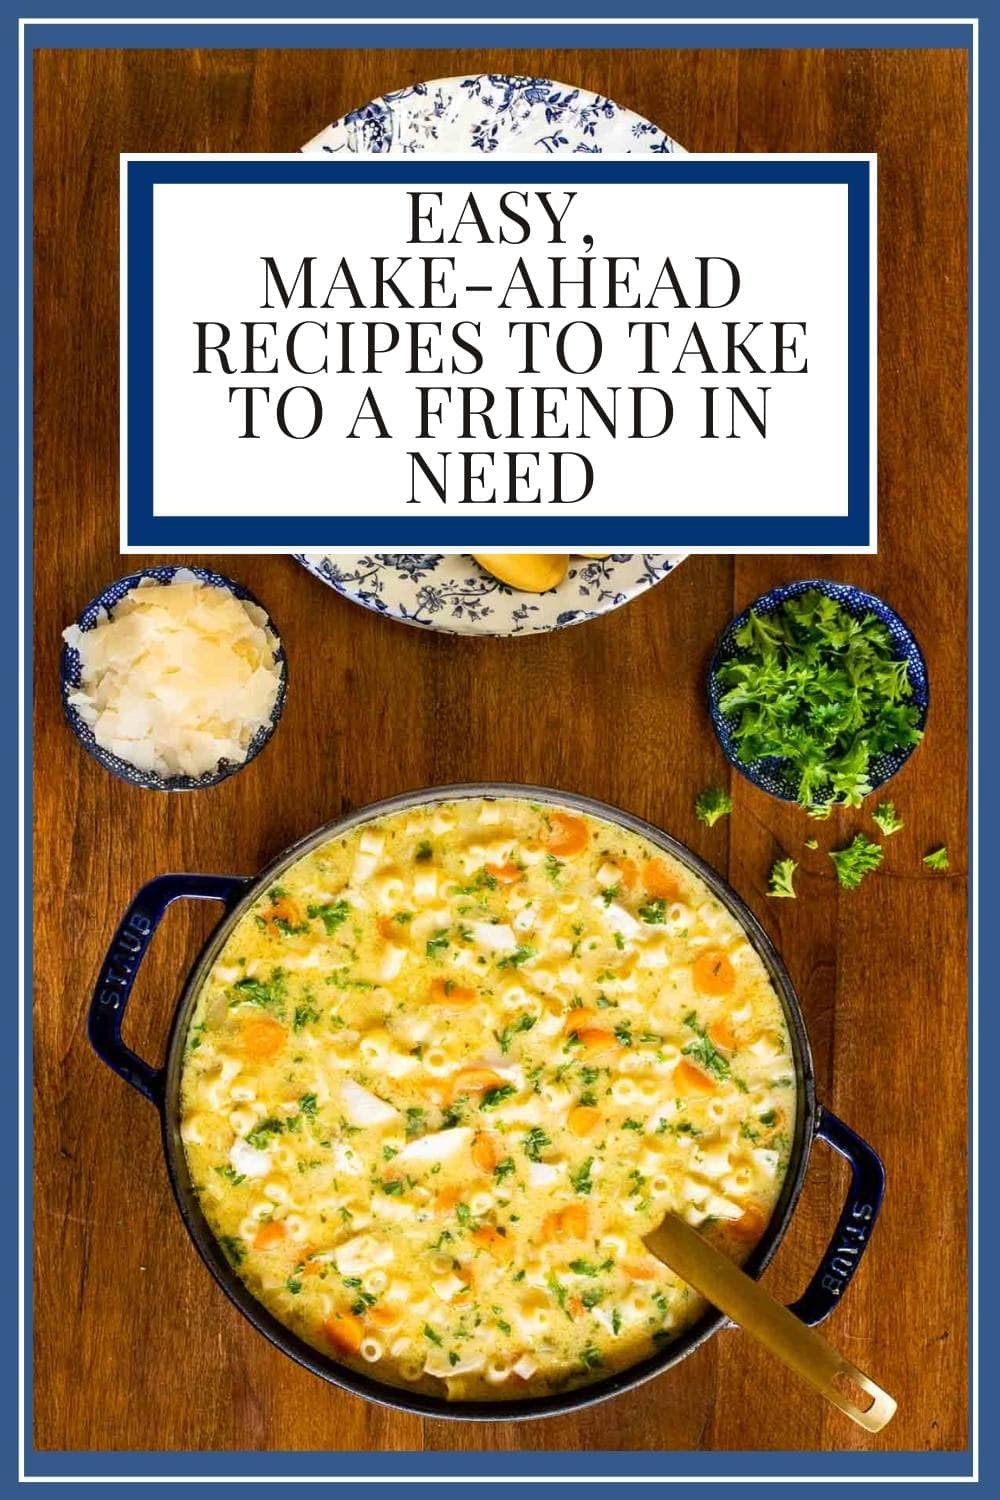 Caring is Sharing - Easy, Make Ahead Recipes for Friends in Need